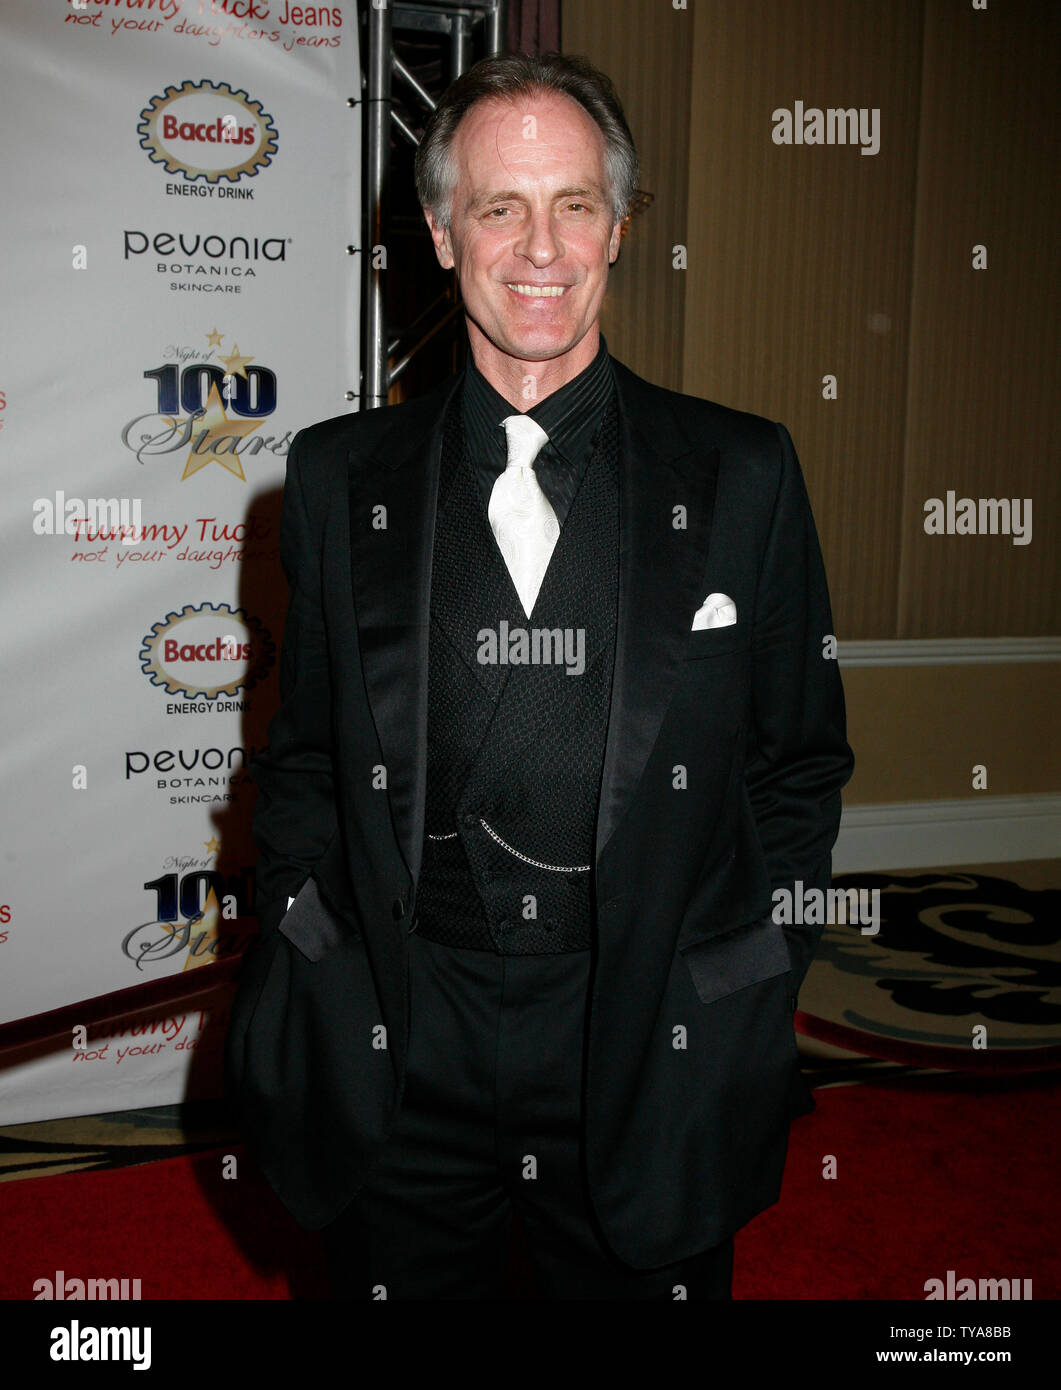 Keith Carradine arrives on the red carpet at the 18th annual Night of 100 Stars Oscar viewing party at the Beverly Hills Hotel in Beverly Hills, California on February 24, 2008.   (UPI Photo/David Silpa) Stock Photo